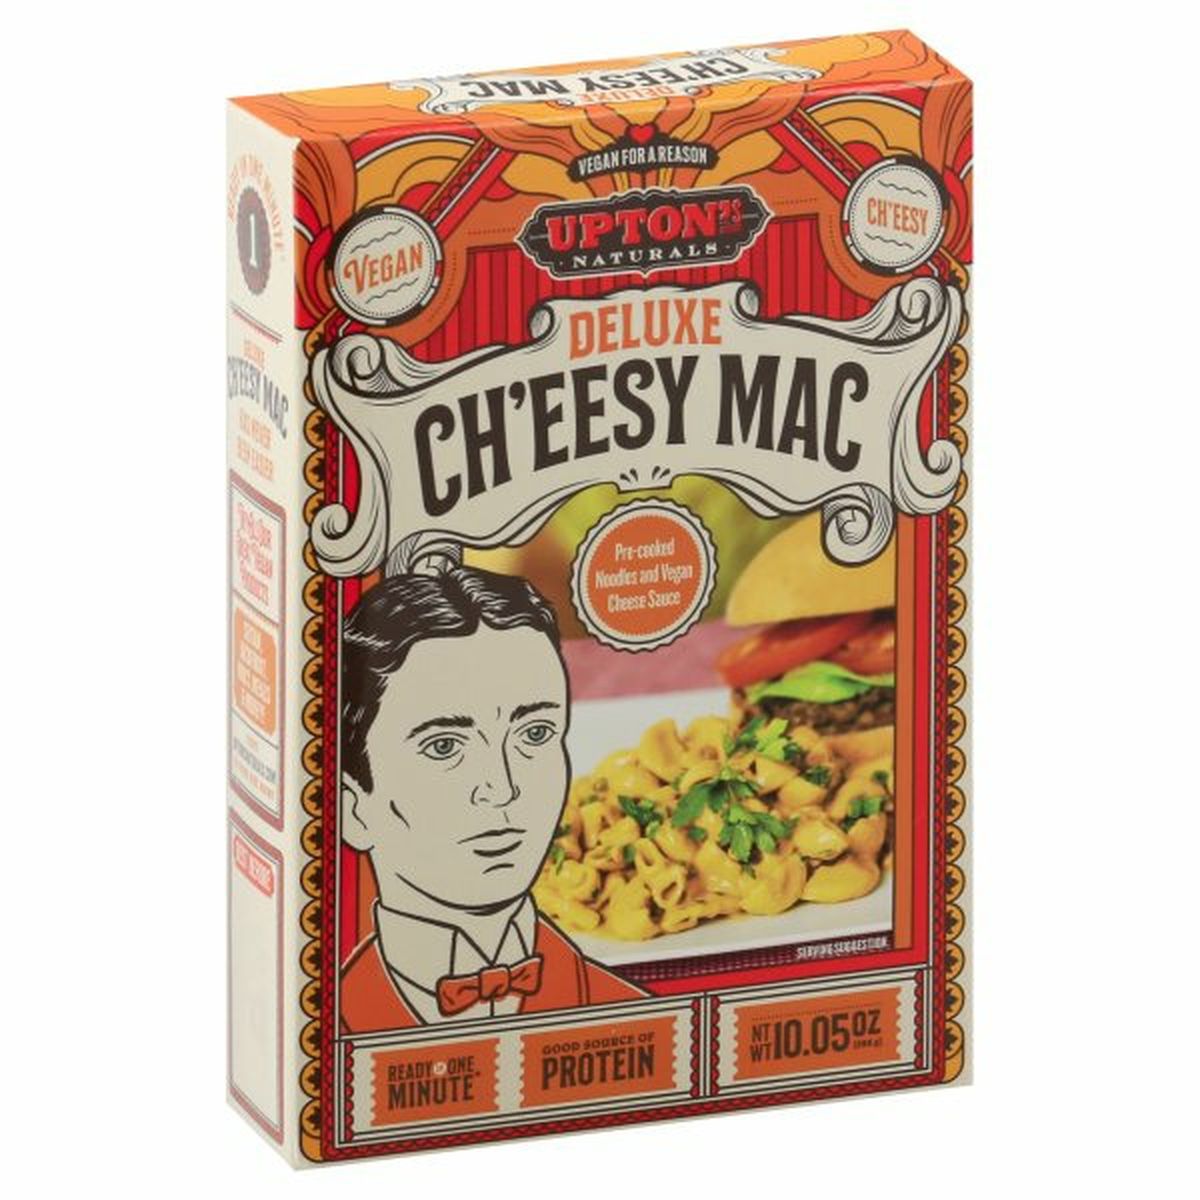 Calories in Upton's Naturals Cheesy Mac, Deluxe